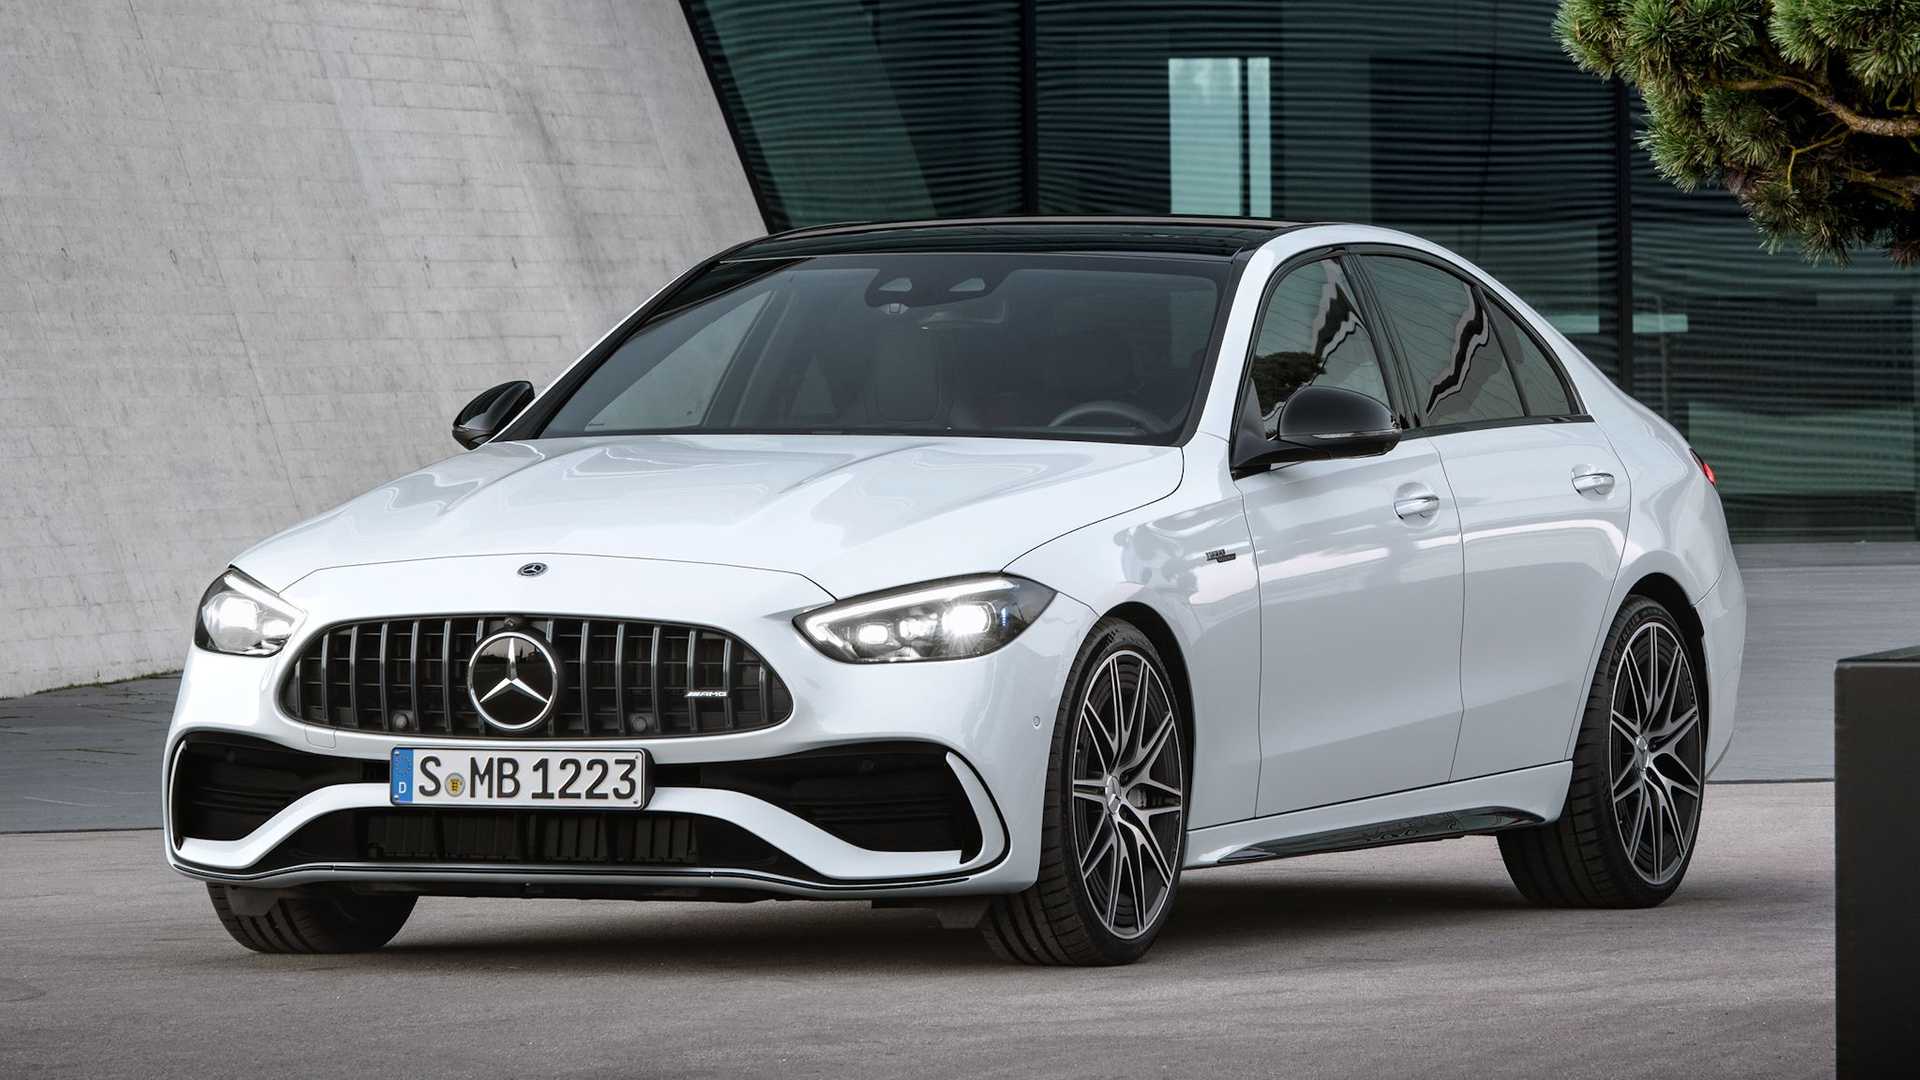 2023 MercedesAMG C43 Revealed, All Specs Available